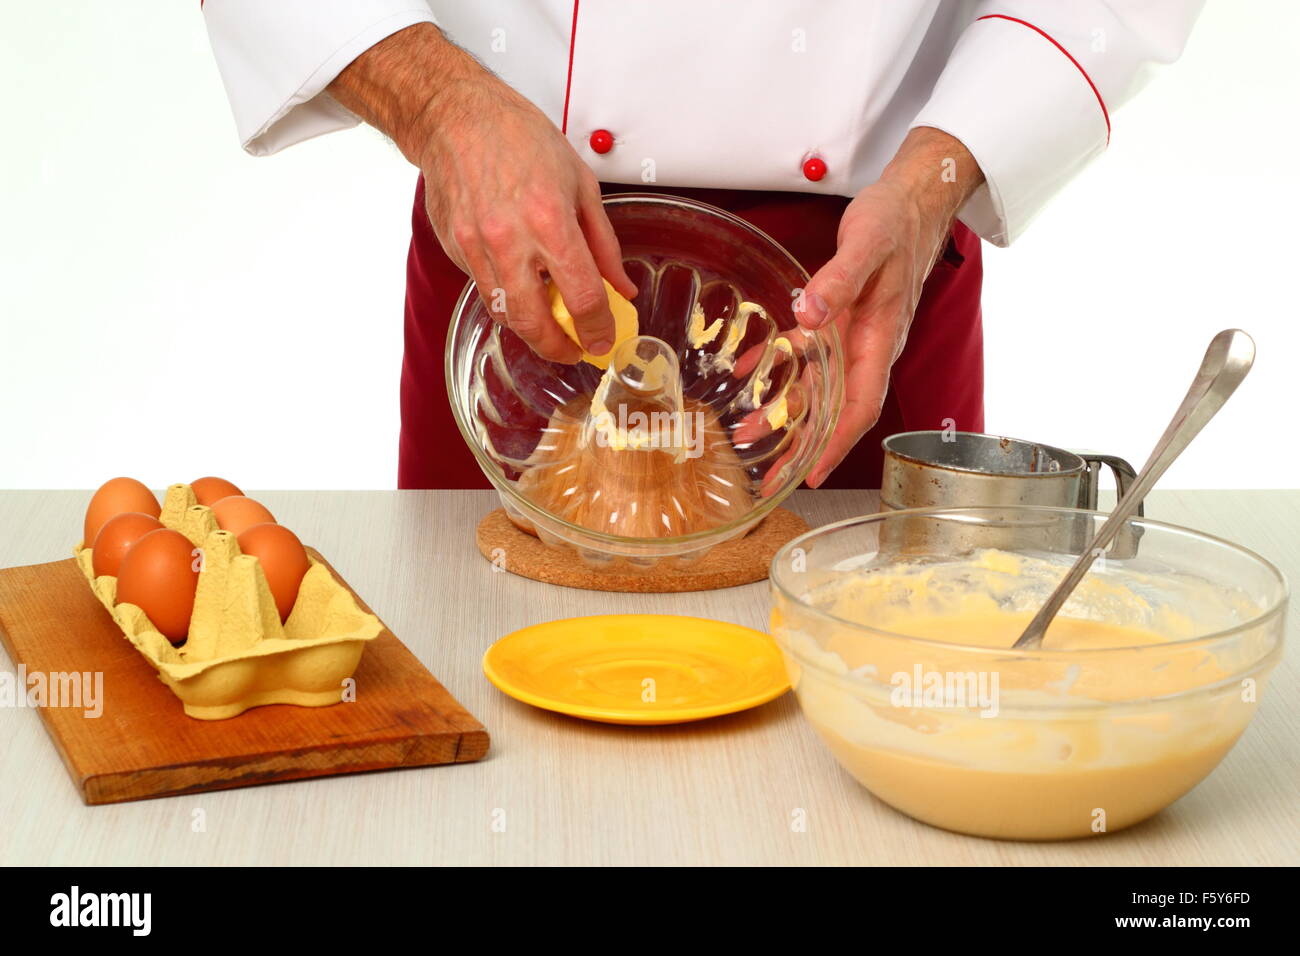 Greasing cake pan with margarine or butter. Making bundt cake with chocolate glaze. Stock Photo